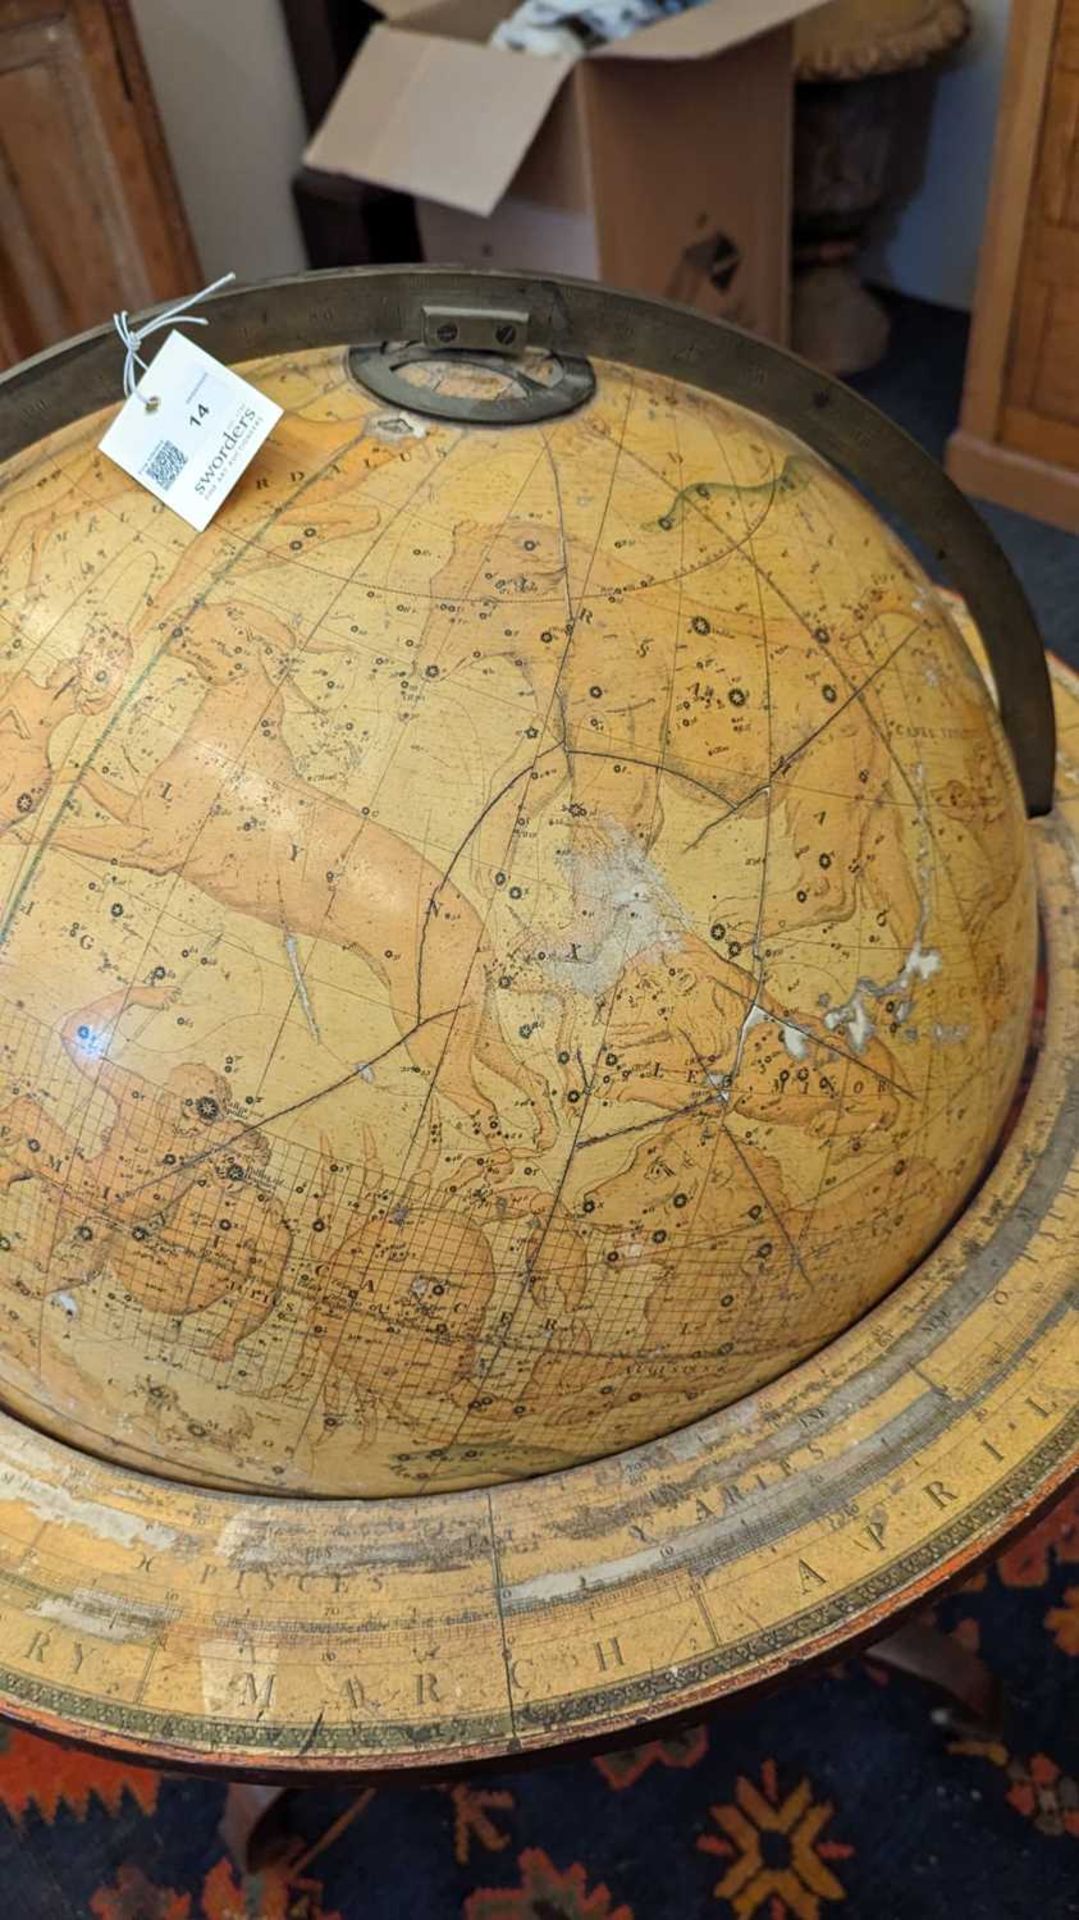 A large celestial library globe by J & W Cary, - Image 17 of 84